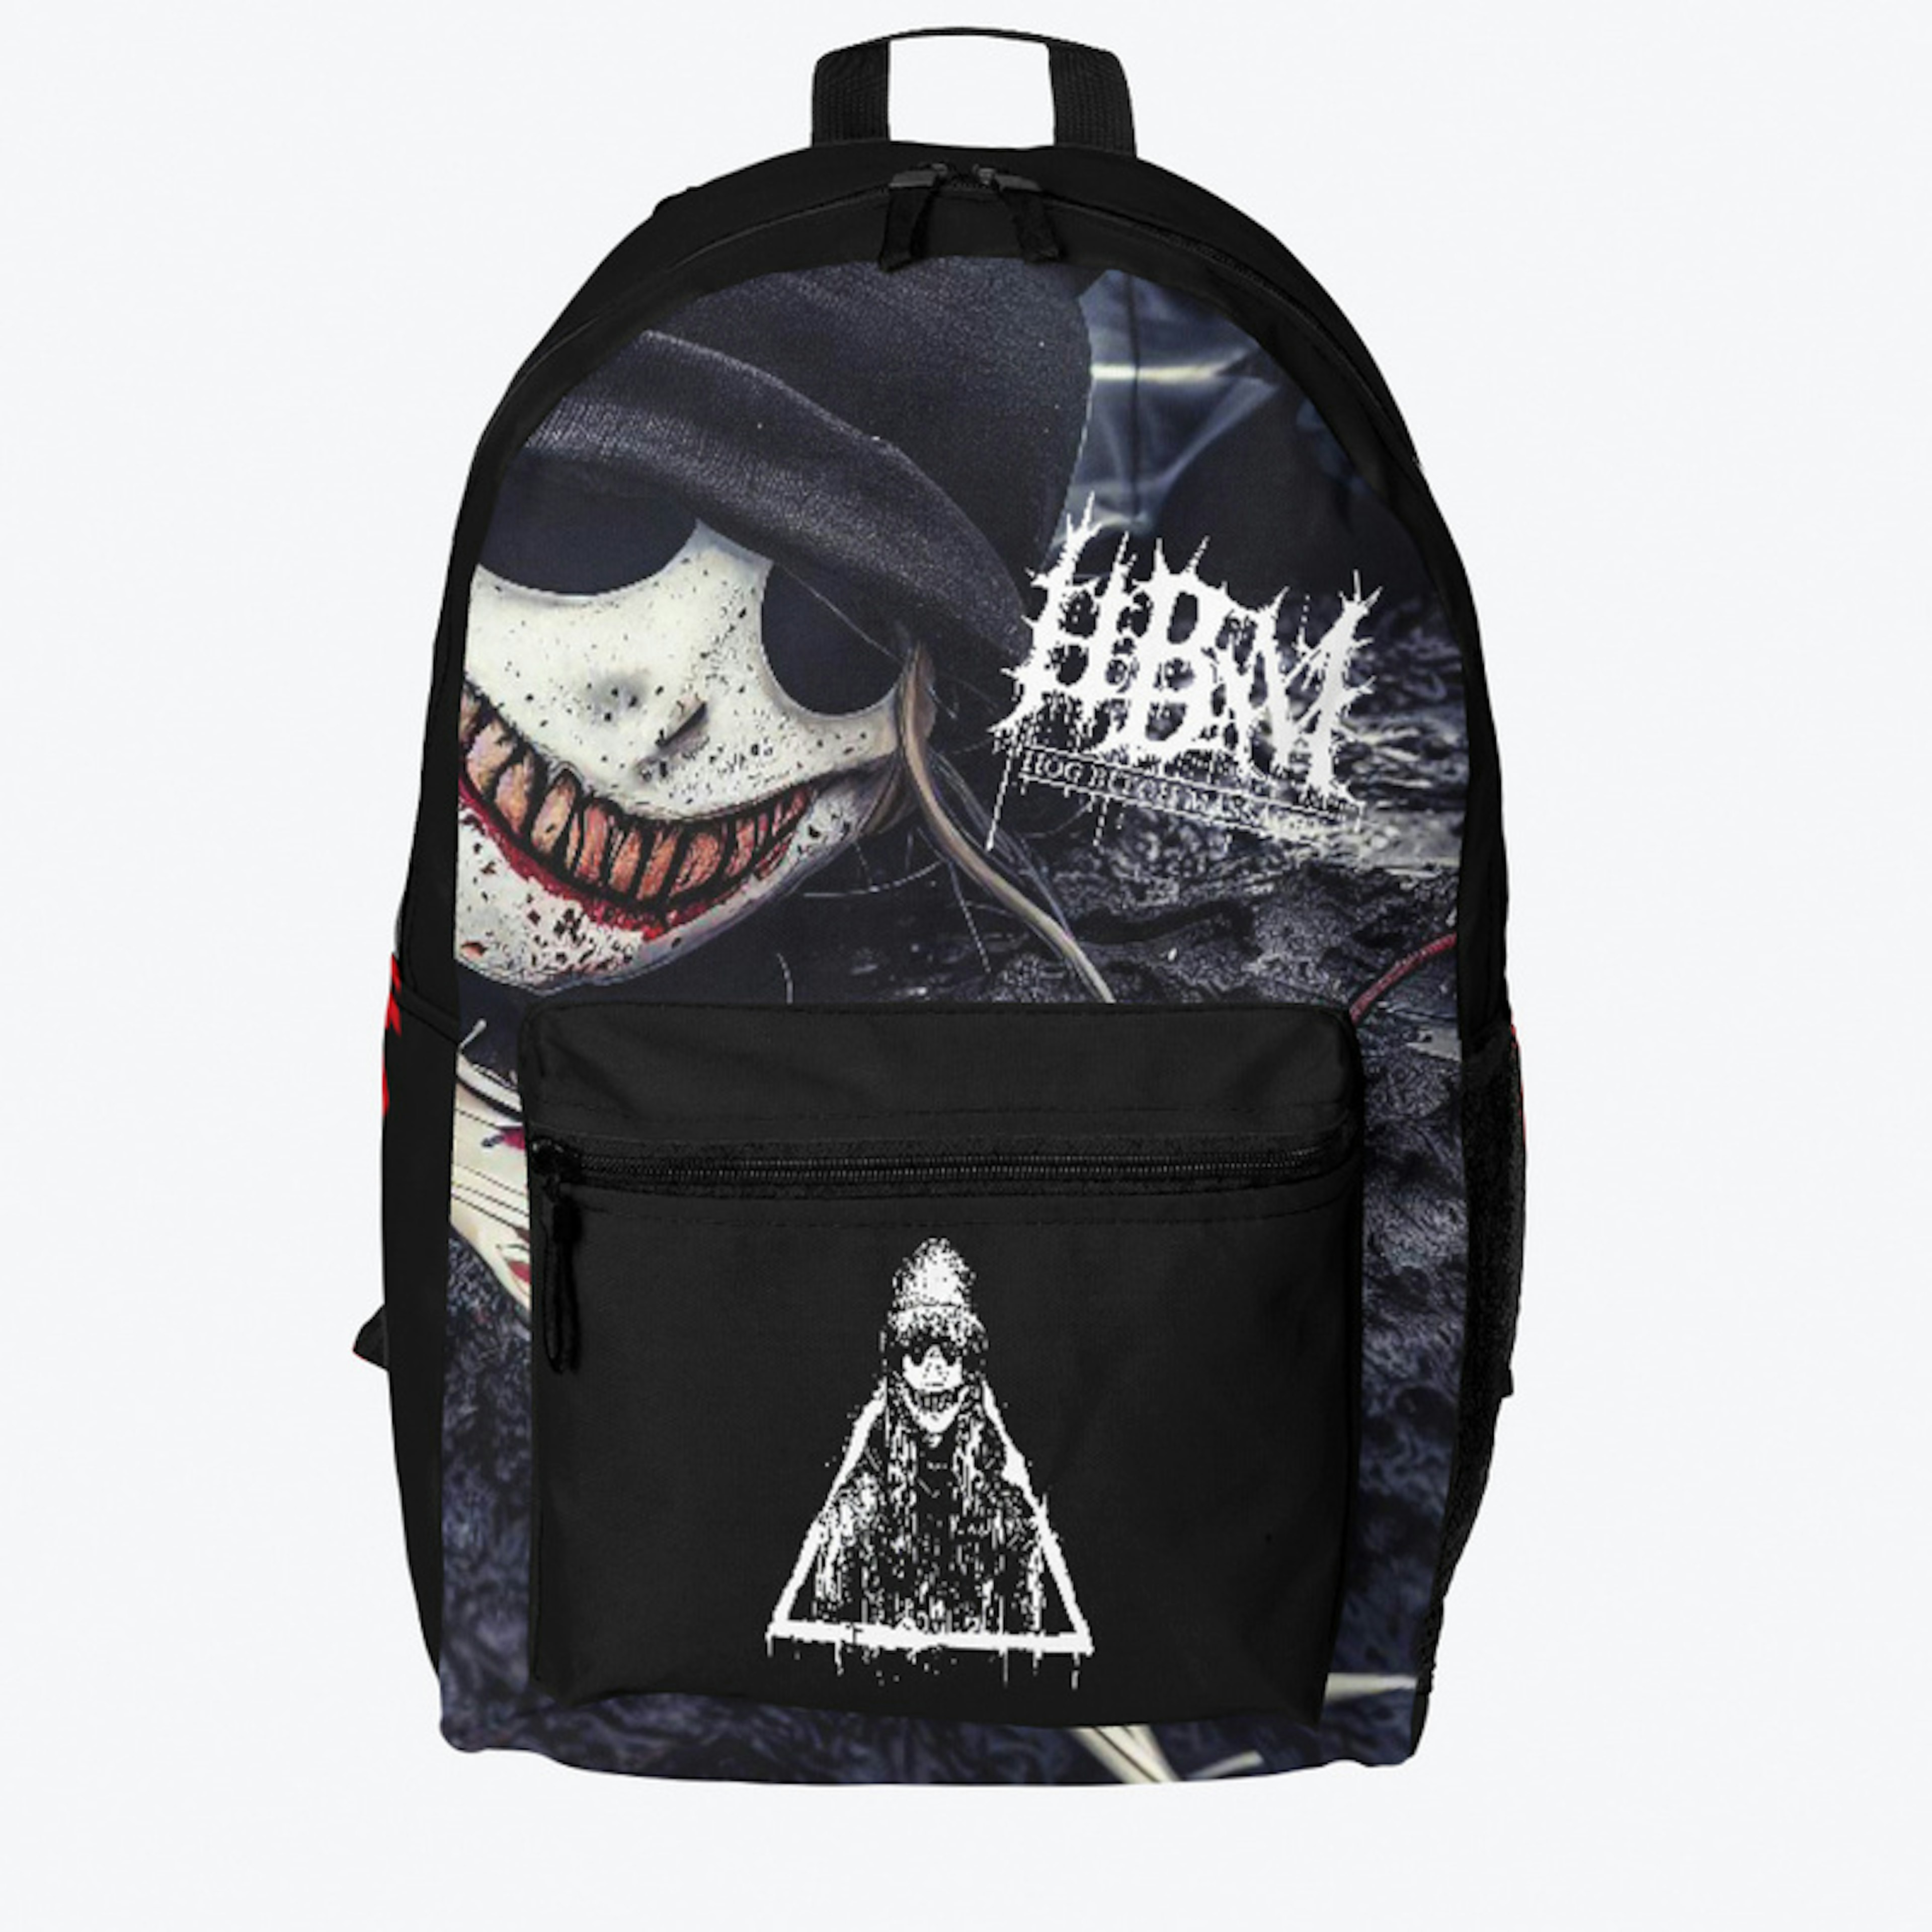 HBM - Many Faces No. 2 Backpack